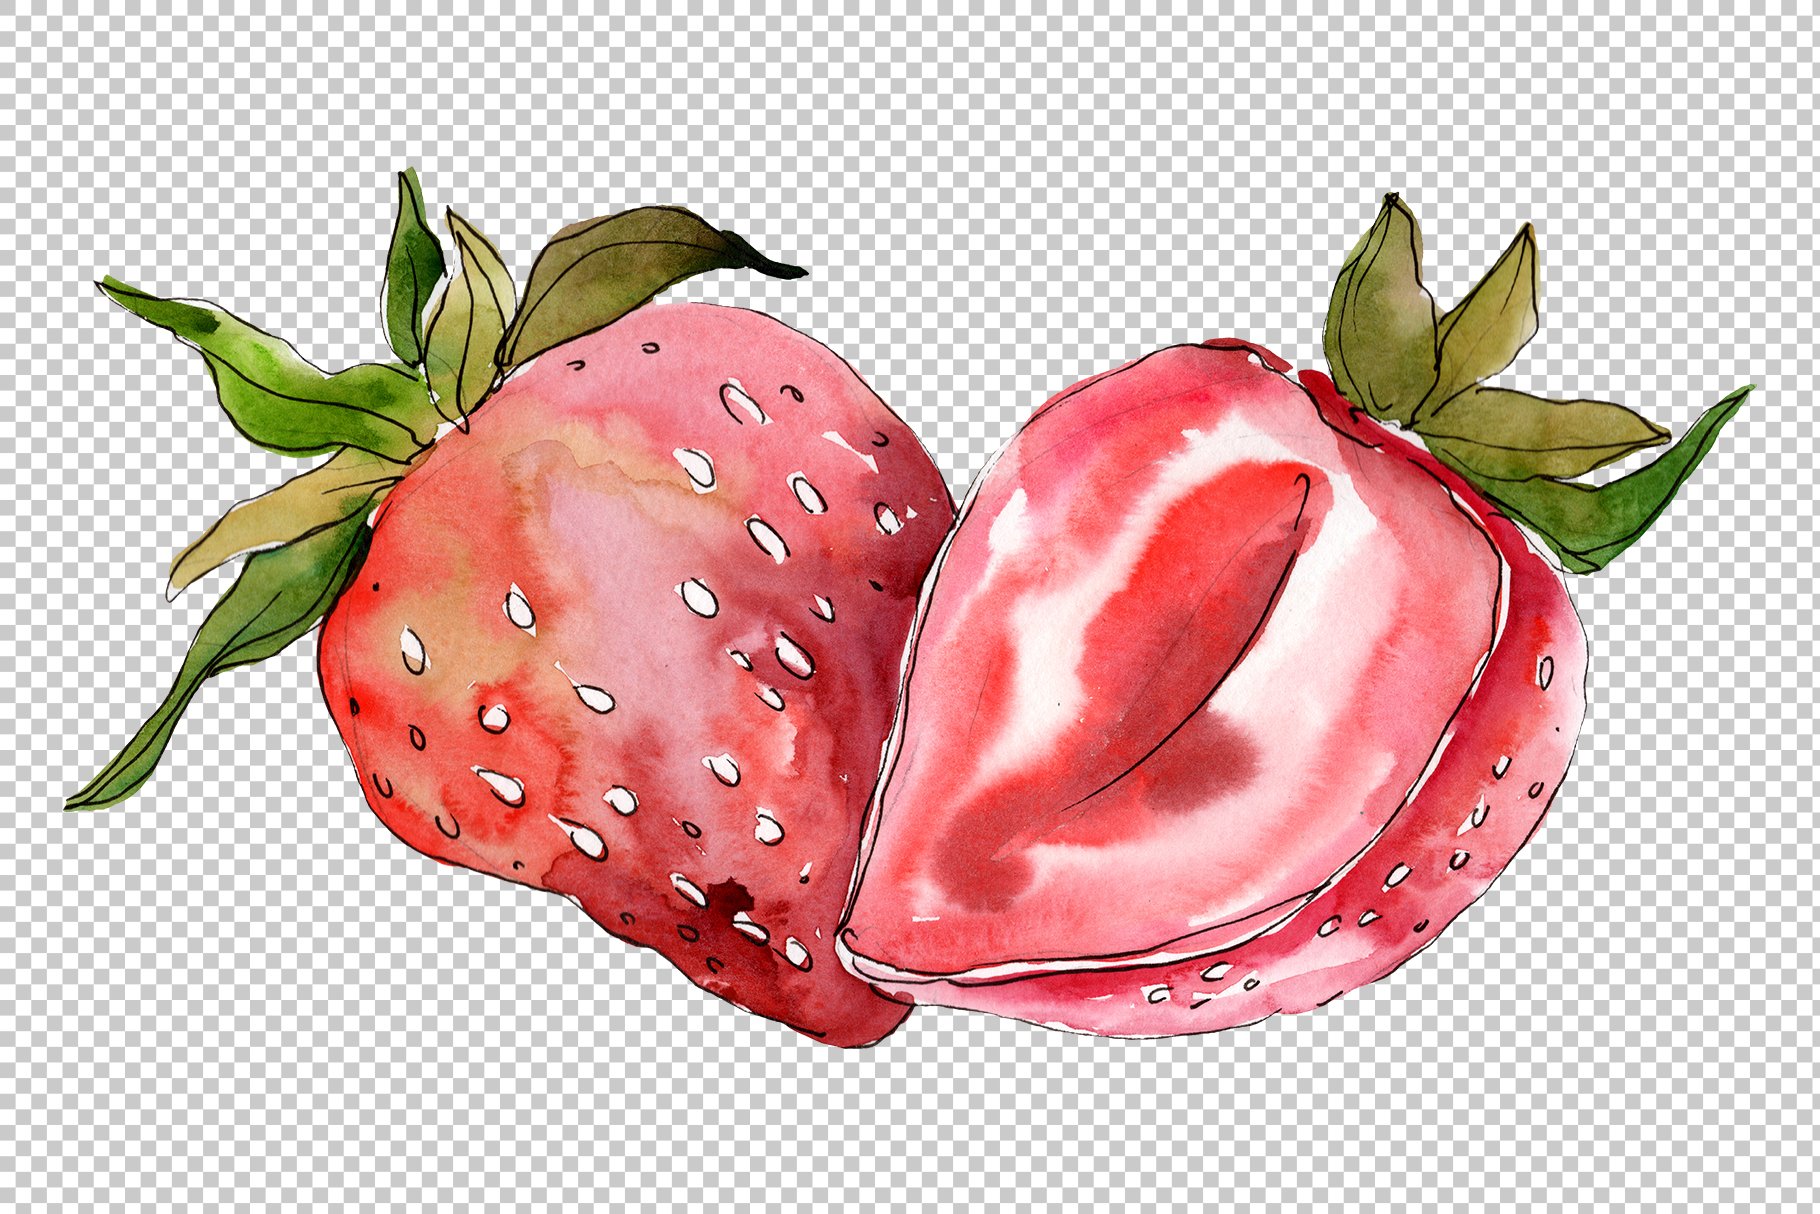 Two watercolor strawberries on a transparent background.